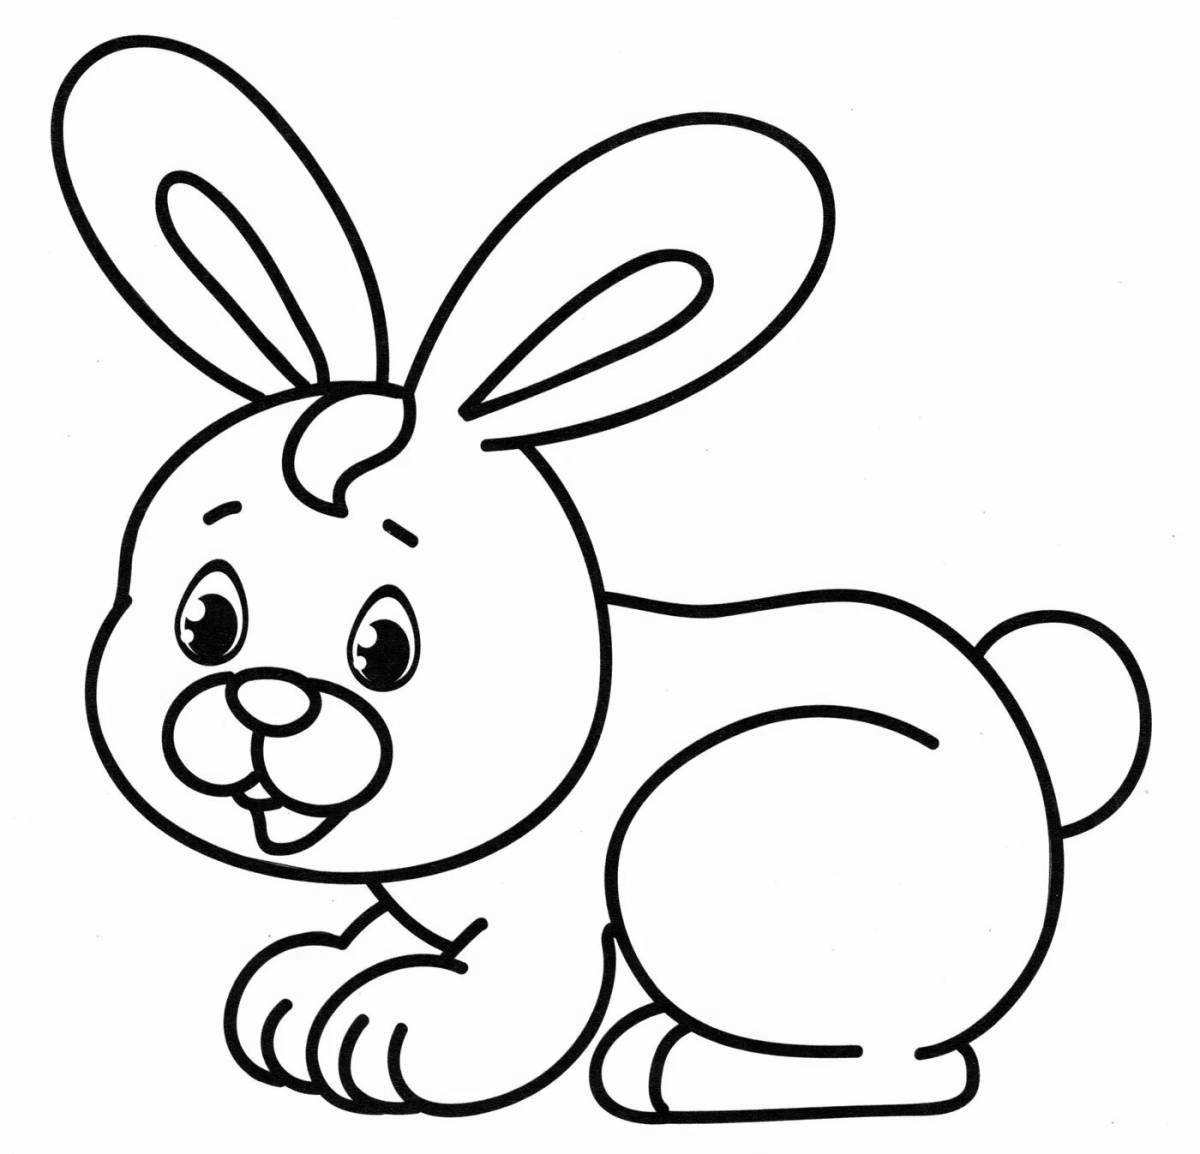 Bunny for children 2 years old #4